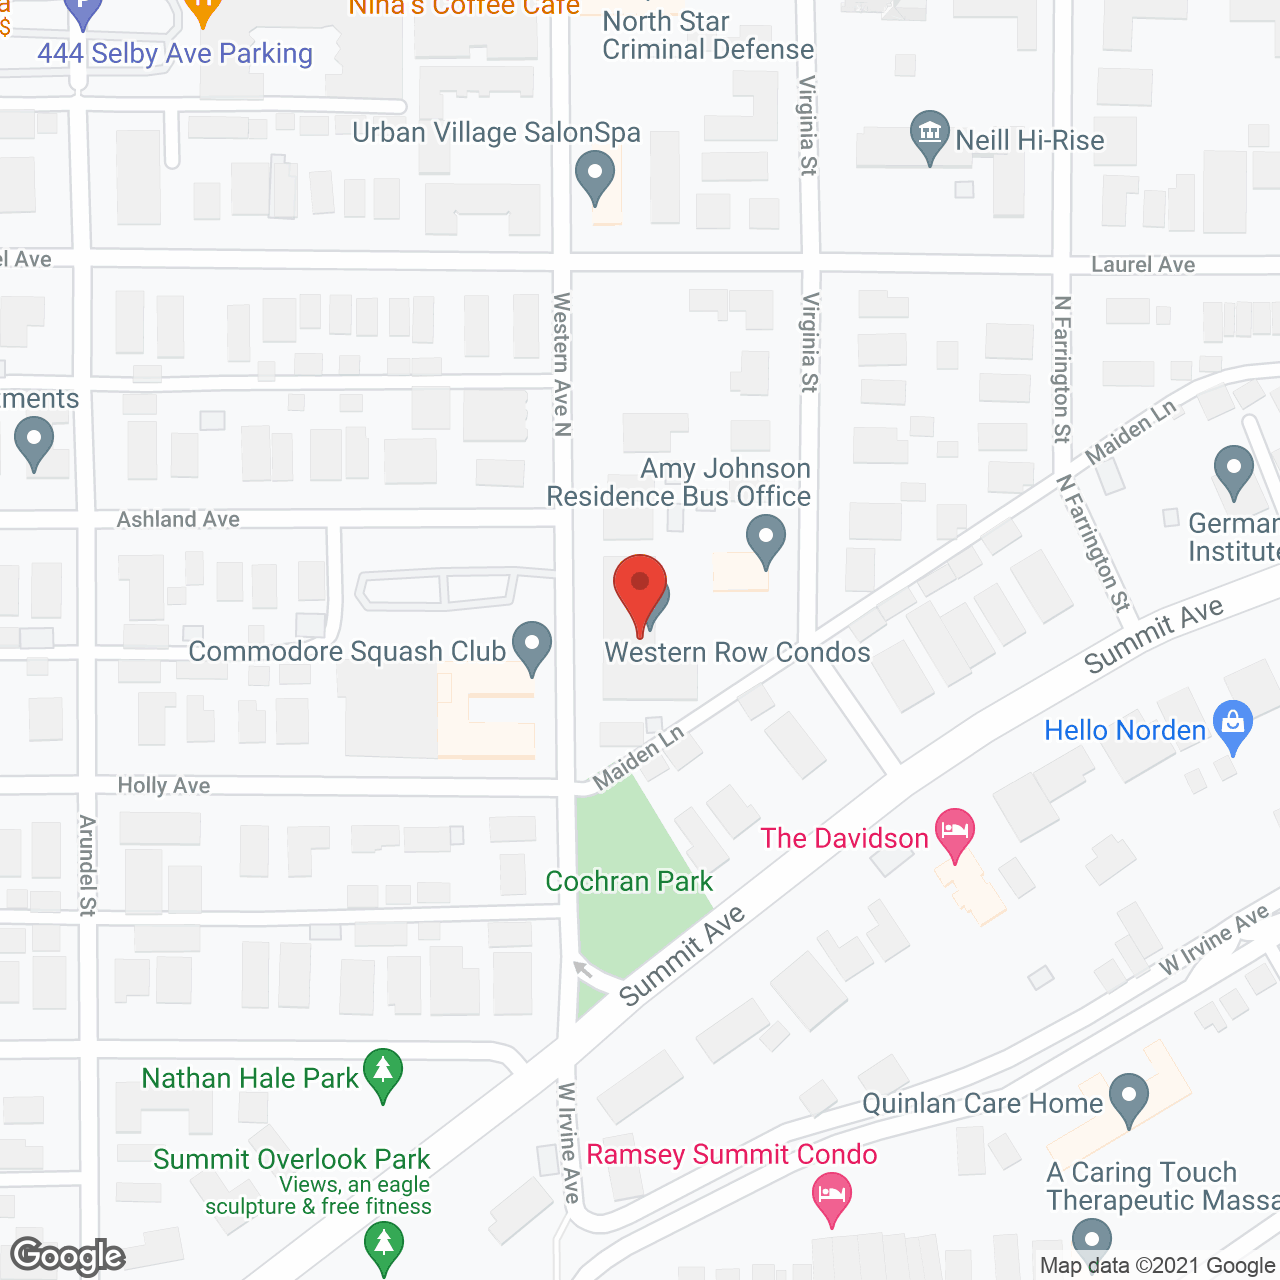 Summit Manor Health Care Ctr in google map